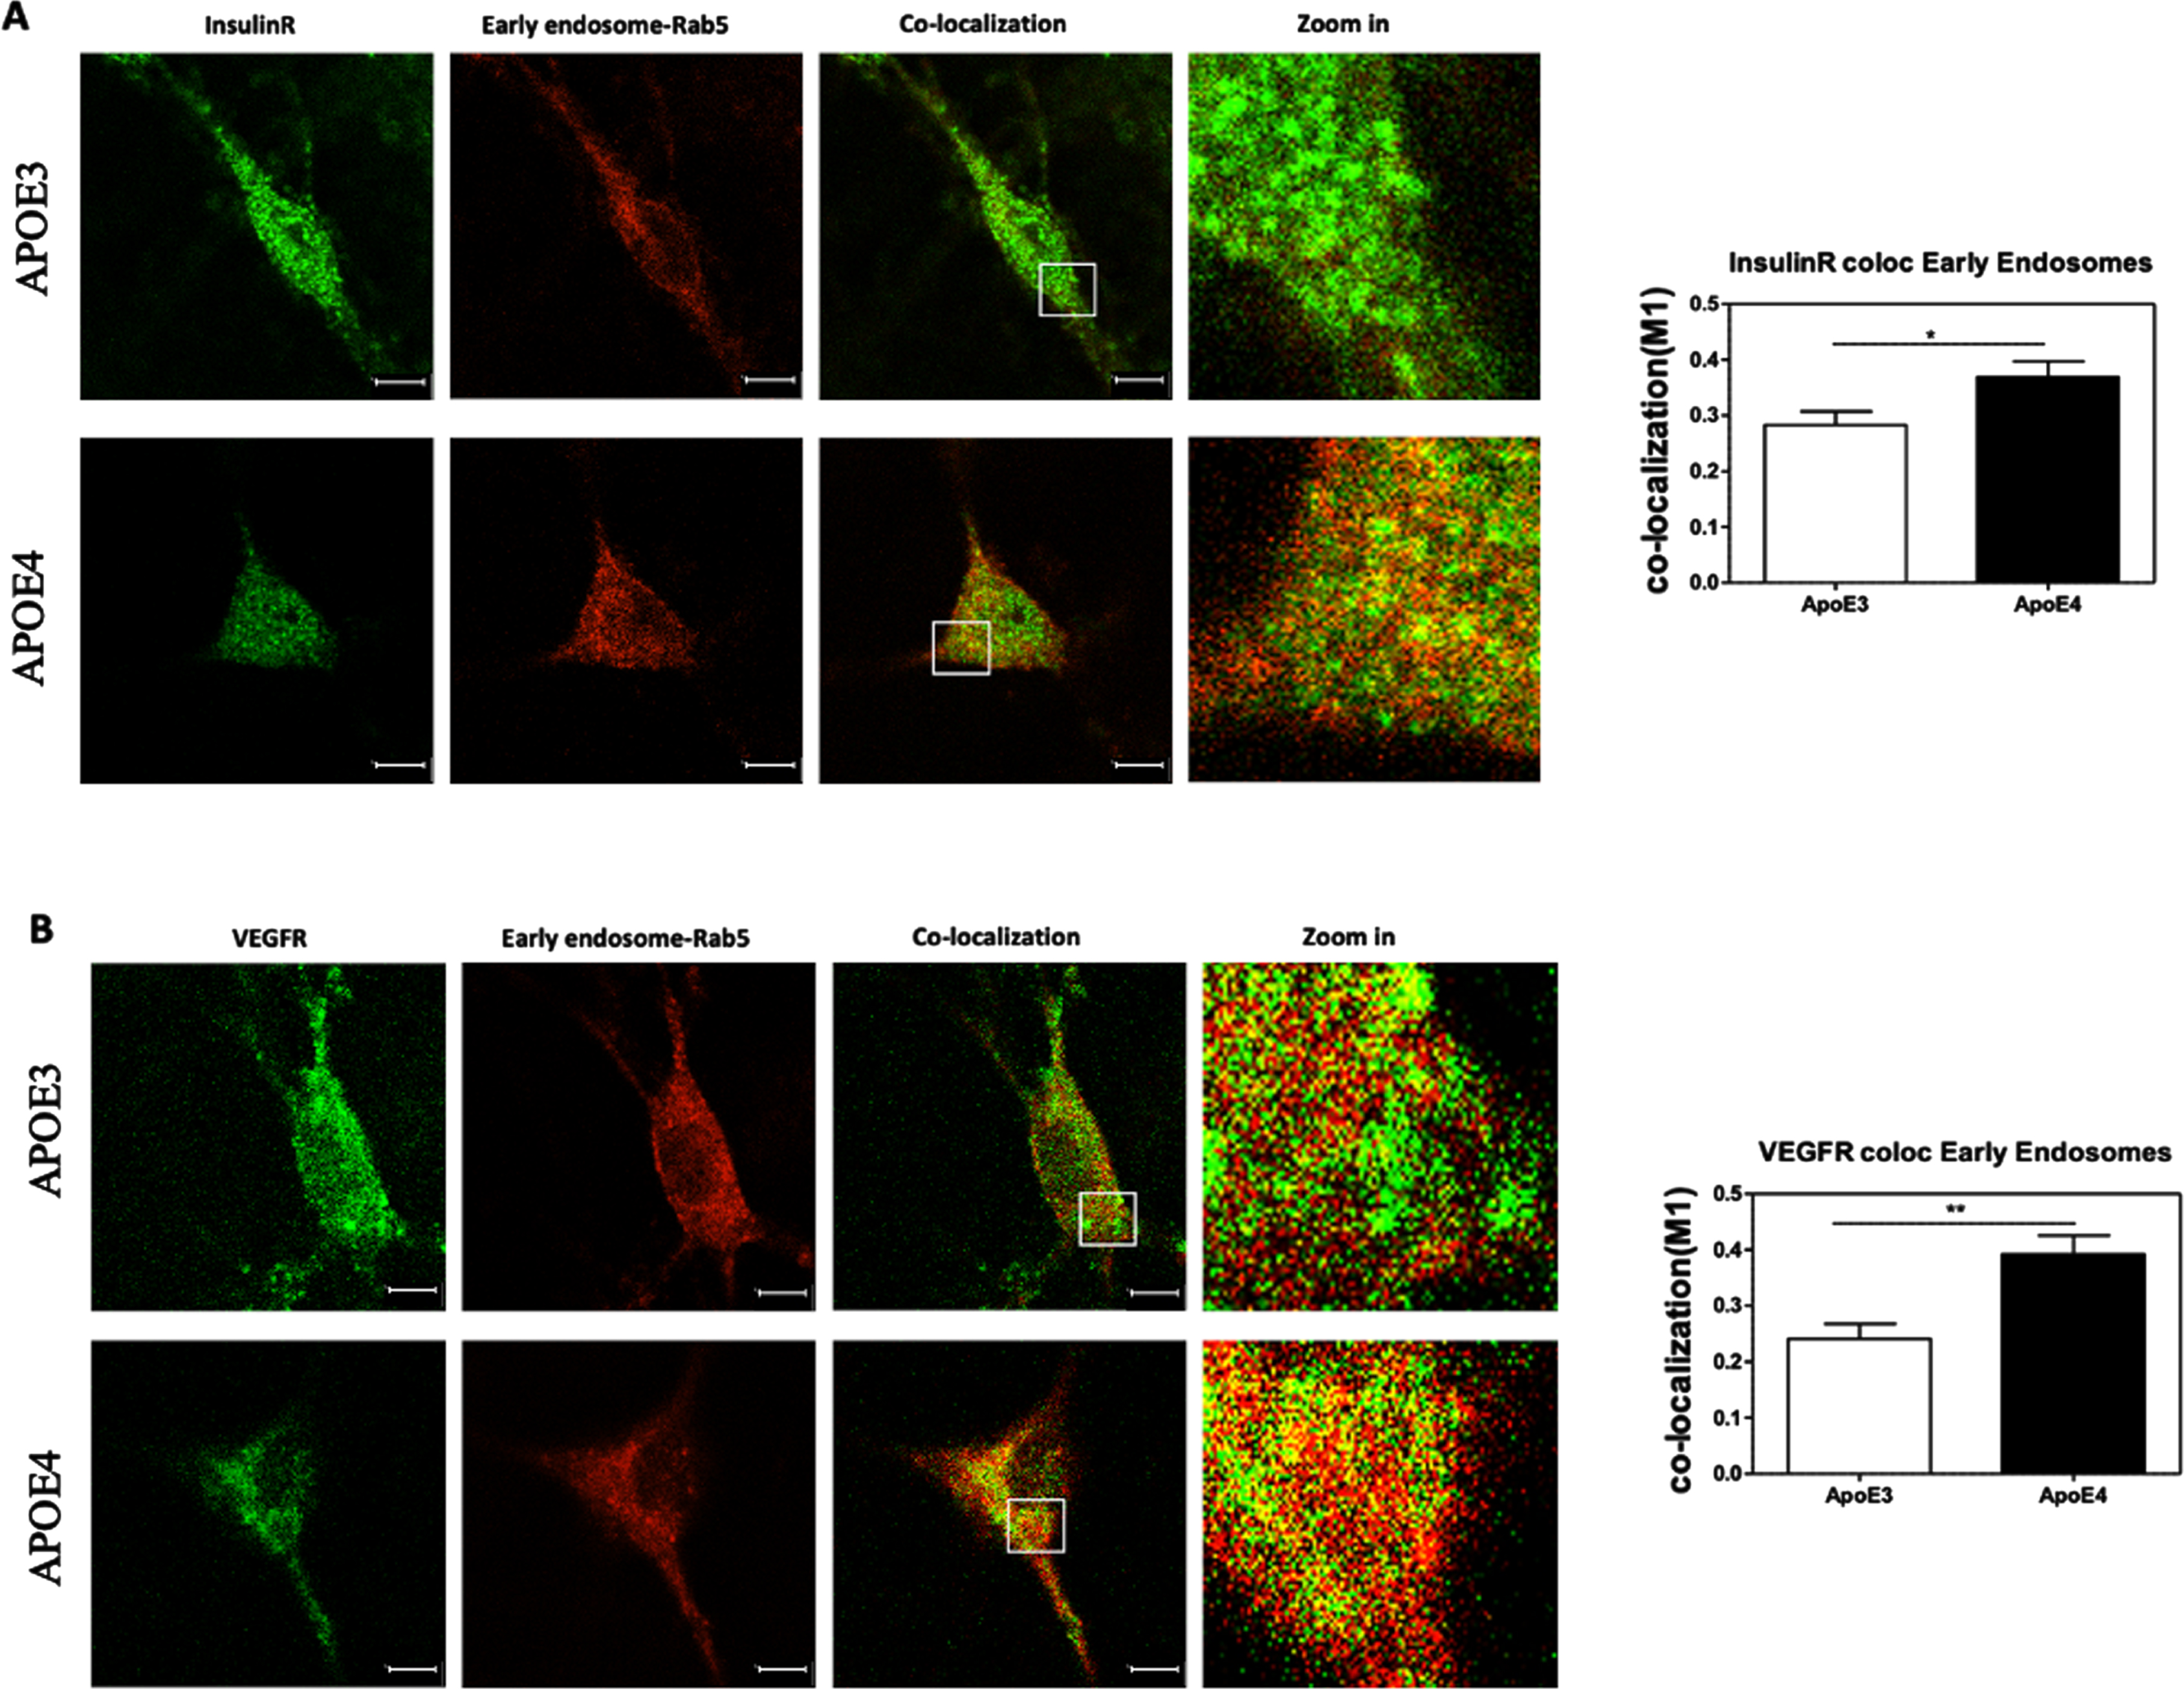 Colocalization of growth factor receptors with early endosomes. The levels of IR (A) and VEGFR (B) that are localized with the early endosomes were evaluated utilizing double staining and confocal microscopy, followed by M1 colocalization analysis. The representative images presented on the left show that the intensity of both IR and VEGFR is lower in APOE4 neurons when compared to APOE3 neurons, and no significant effects of APOE genotype is evident in the staining areas of the early endosomes. On the other hand, the extent of colocalization of these receptors (marked with yellow pixels) was higher in APOE4 neurons in both IR and VEGFR. Quantification of the results show that APOE4 neurons exhibit significantly higher colocalization than APOE3 in both IR (APOE3 = 0.28±0.02, APOE4 = 0.36±0.02, p < 0.05) and VEGFR (APOE3 = 0.24±0.02, APOE4 = 0.39±0.03, p < 0.001). The scalebar on the images indicate 10μm. *p < 0.05, **p < 0.001.